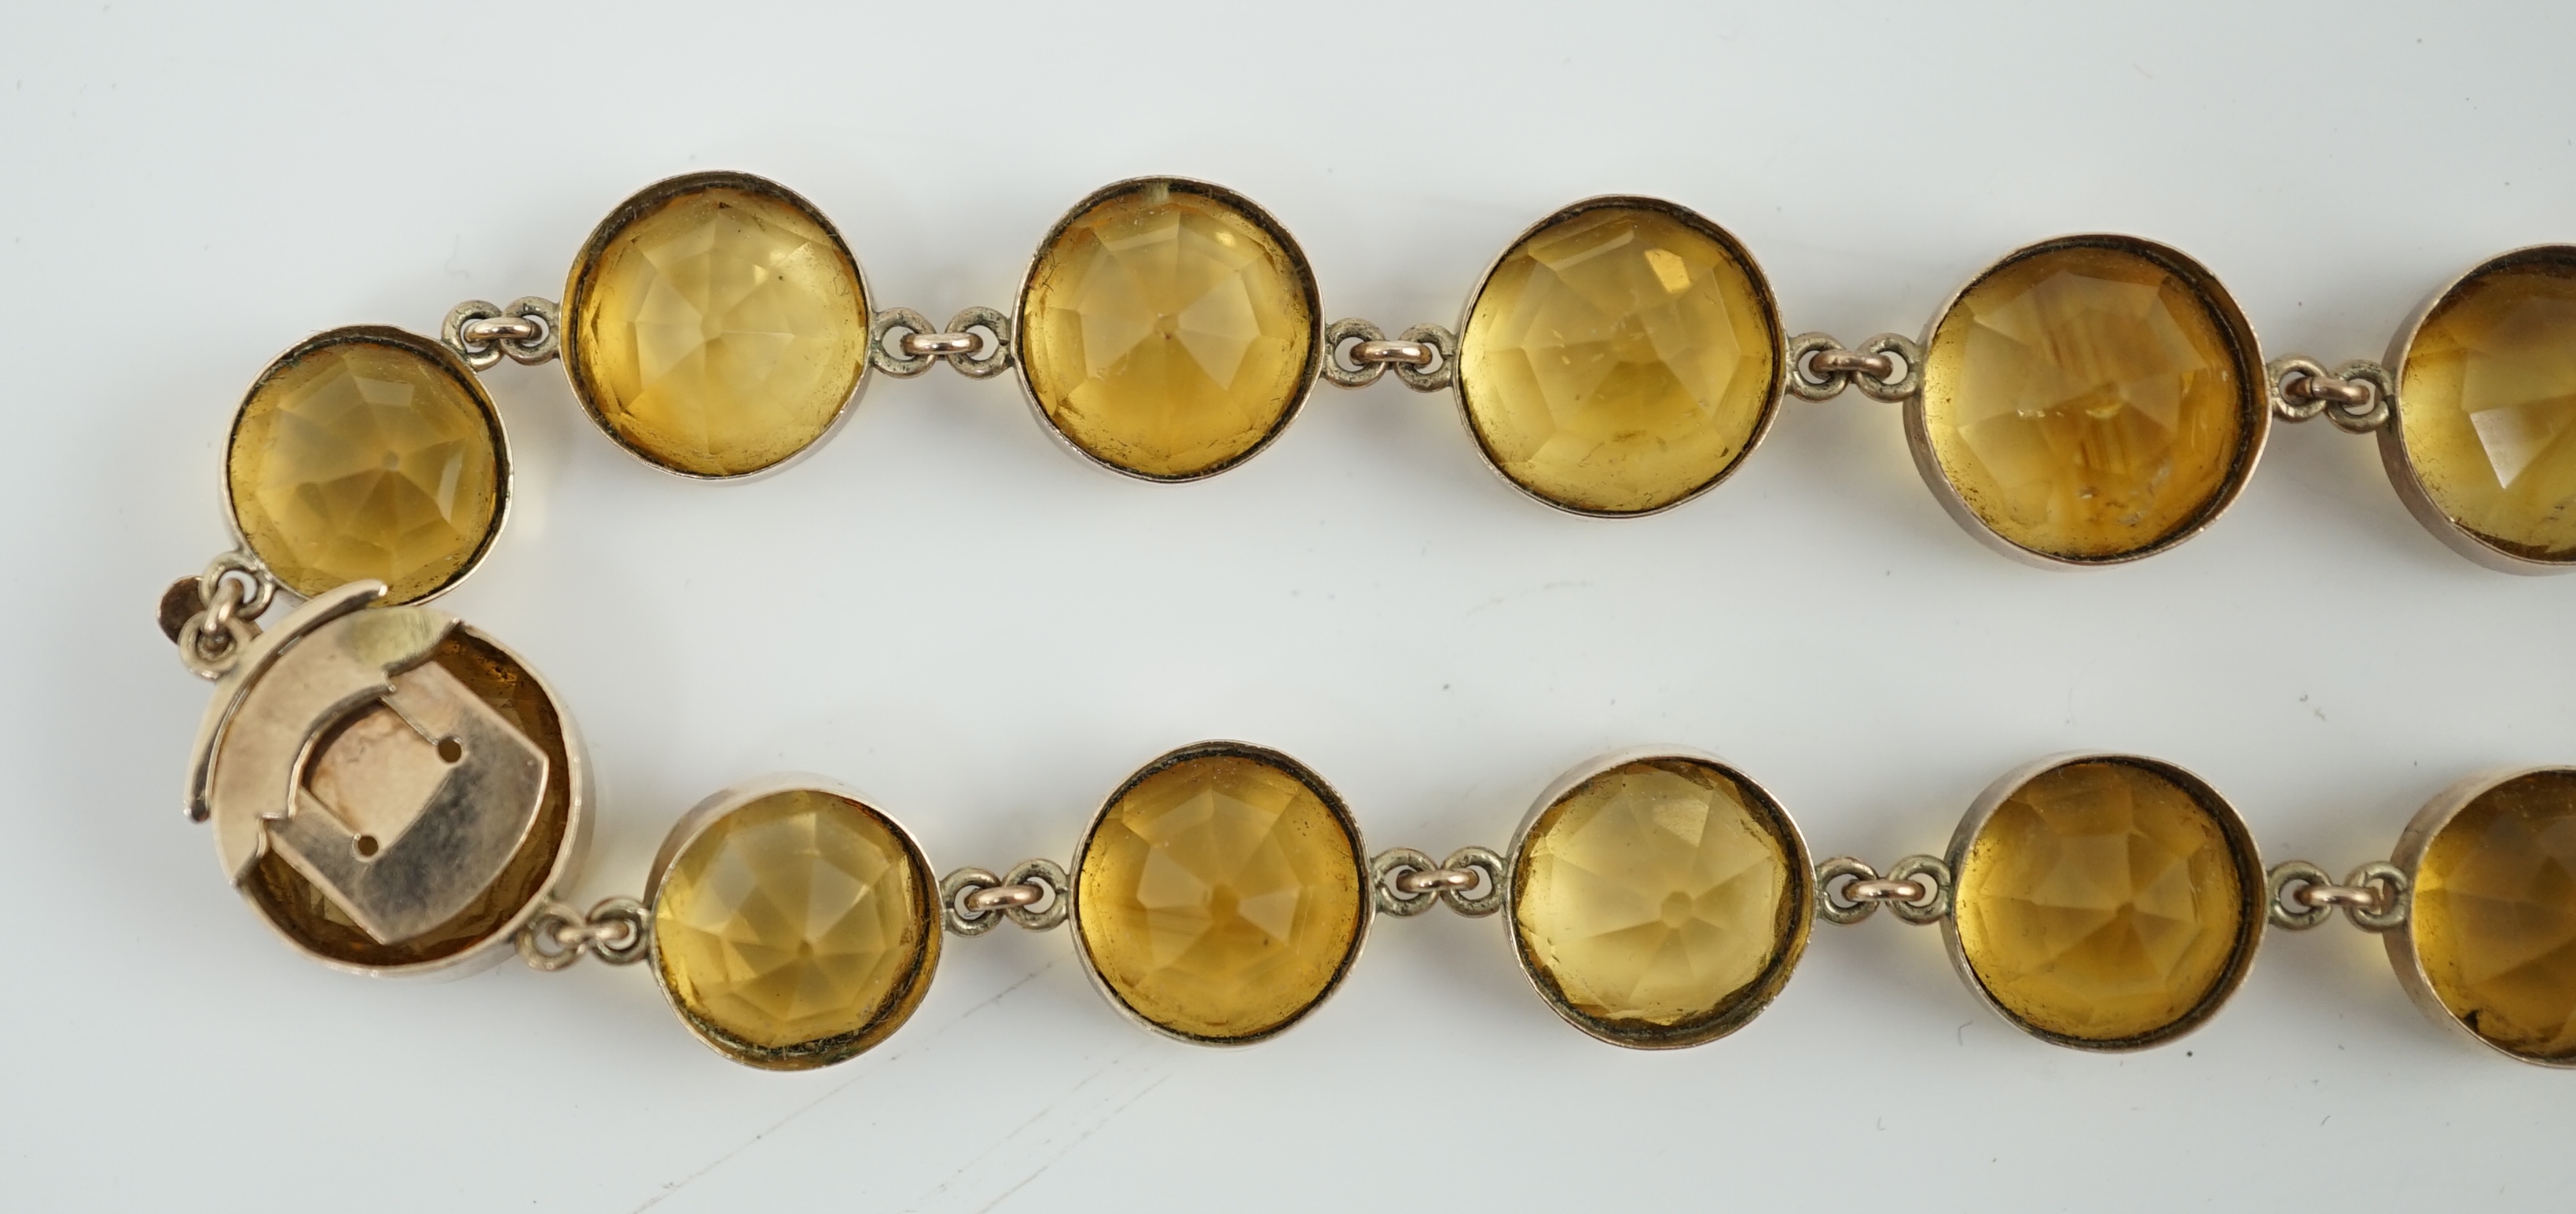 An early 19th century gold and citrine riviere necklace